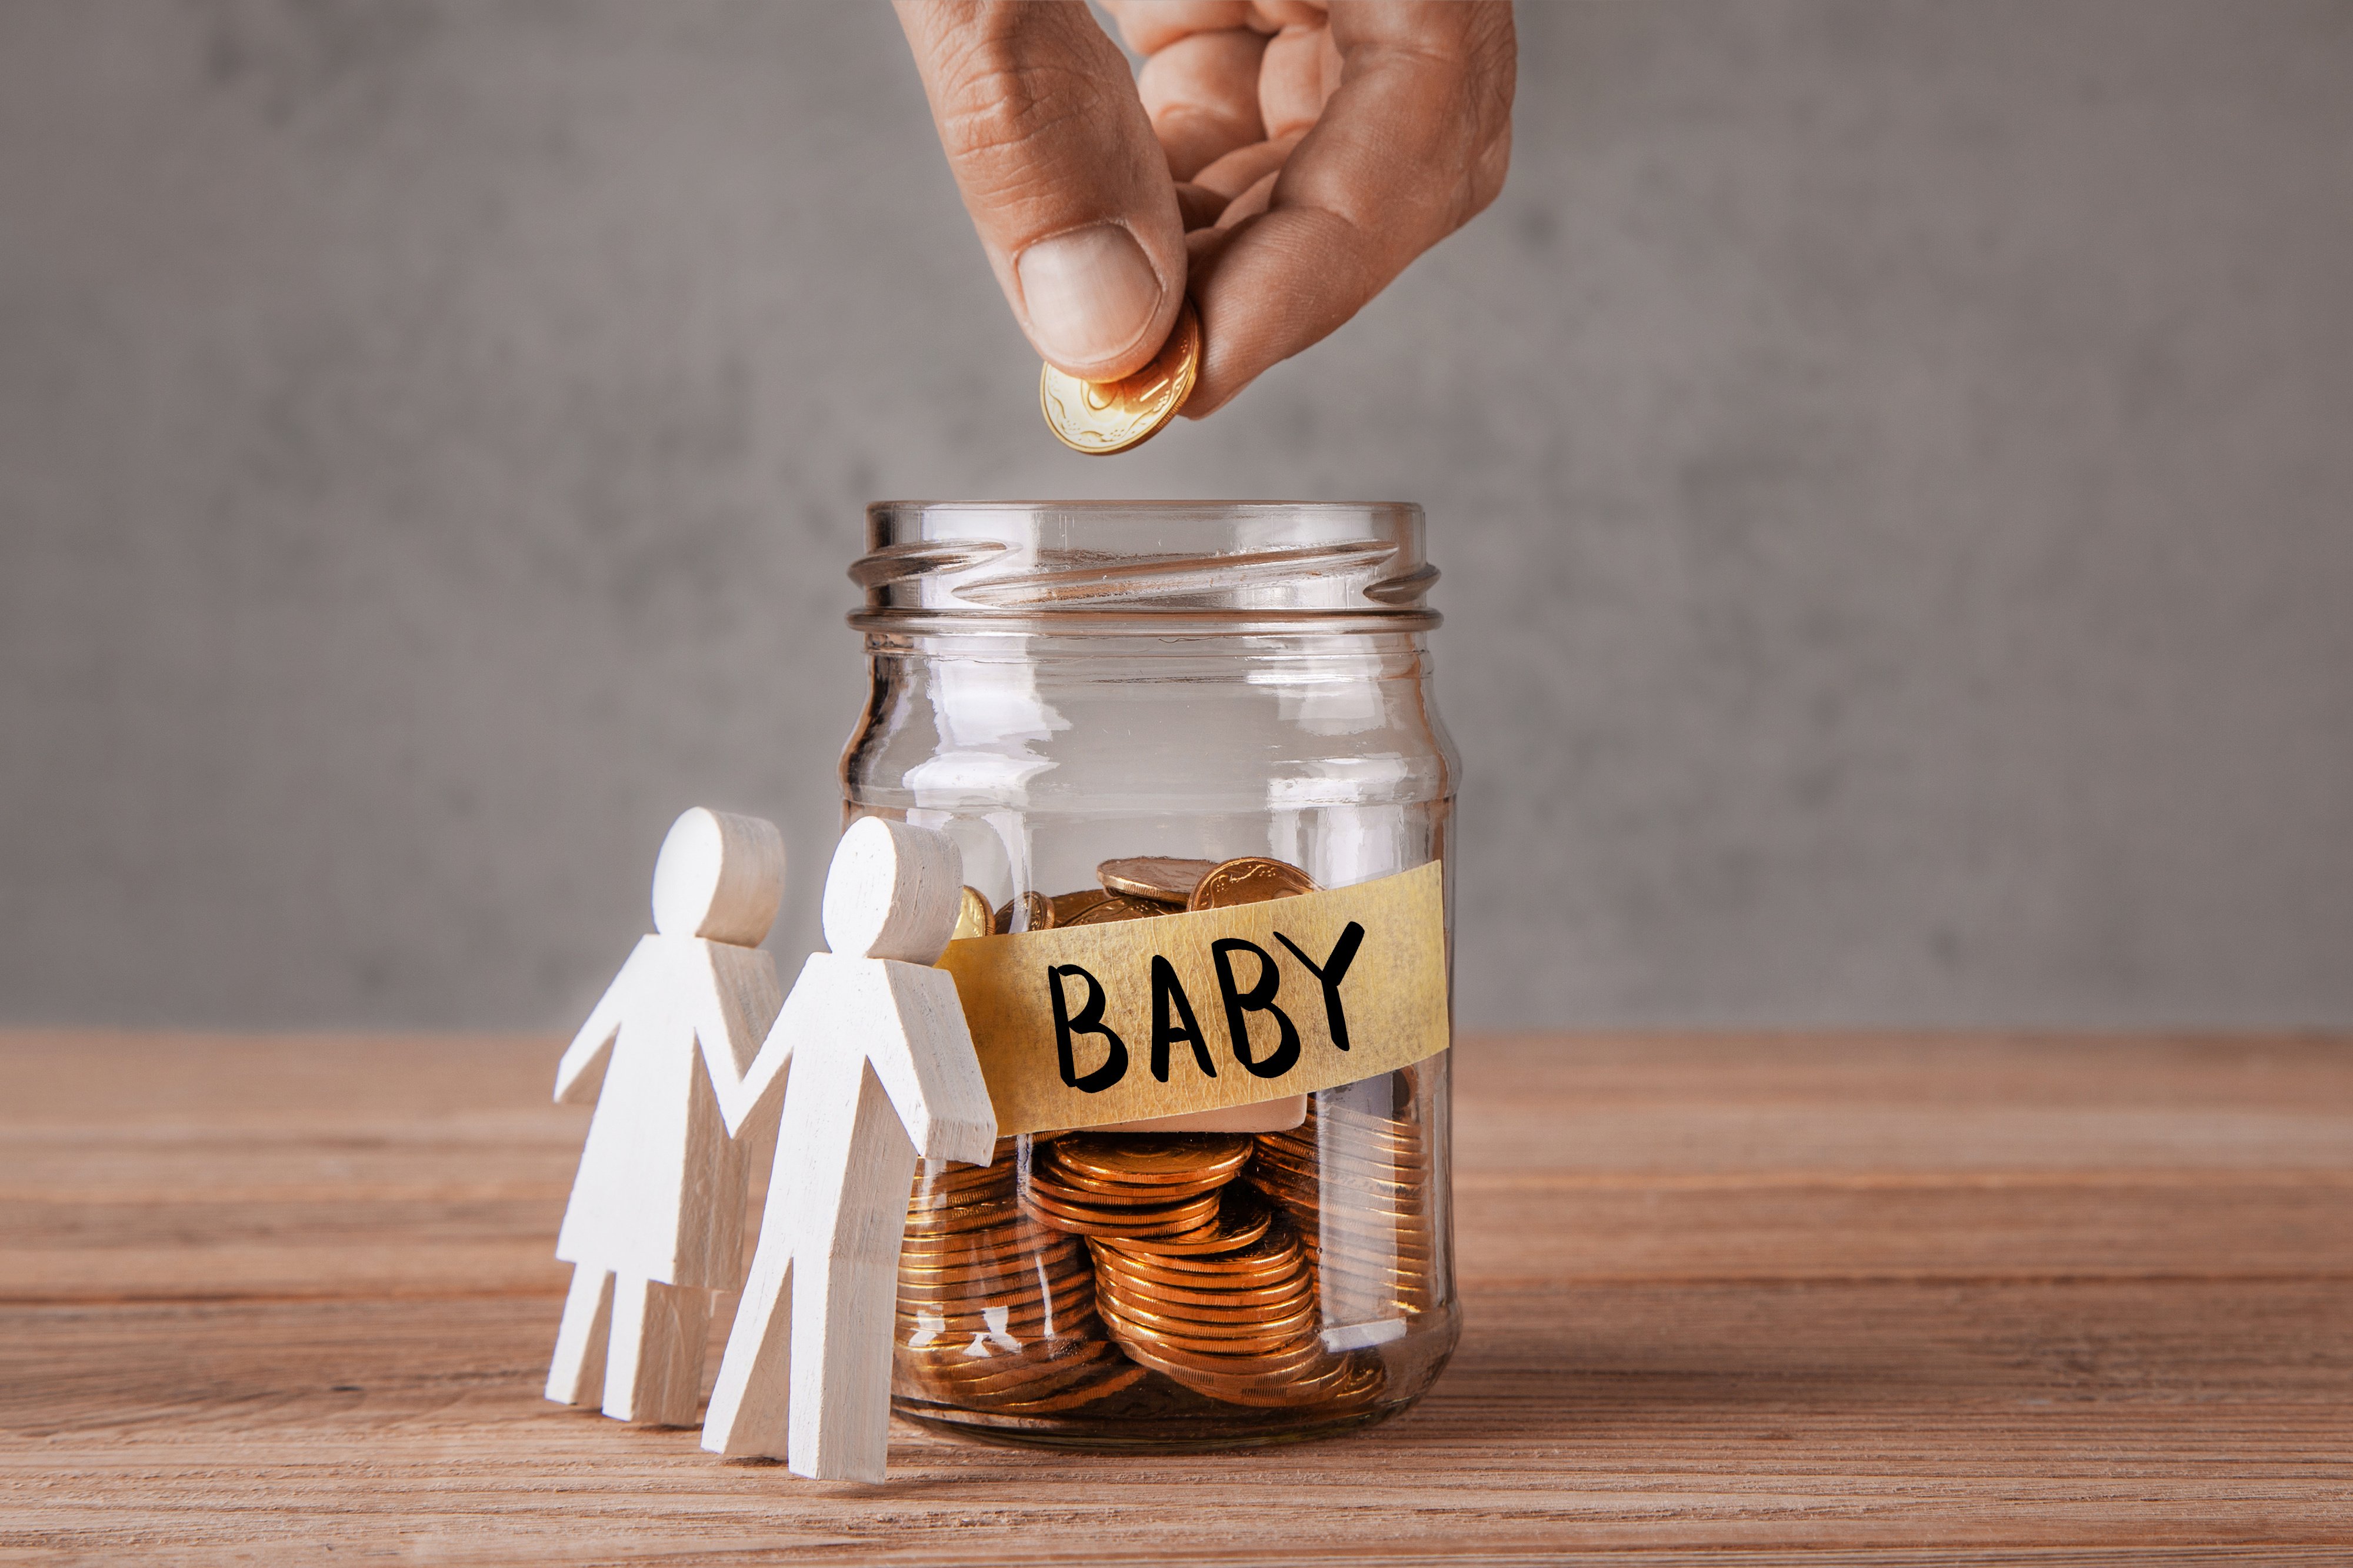 Prepare Financially for Baby